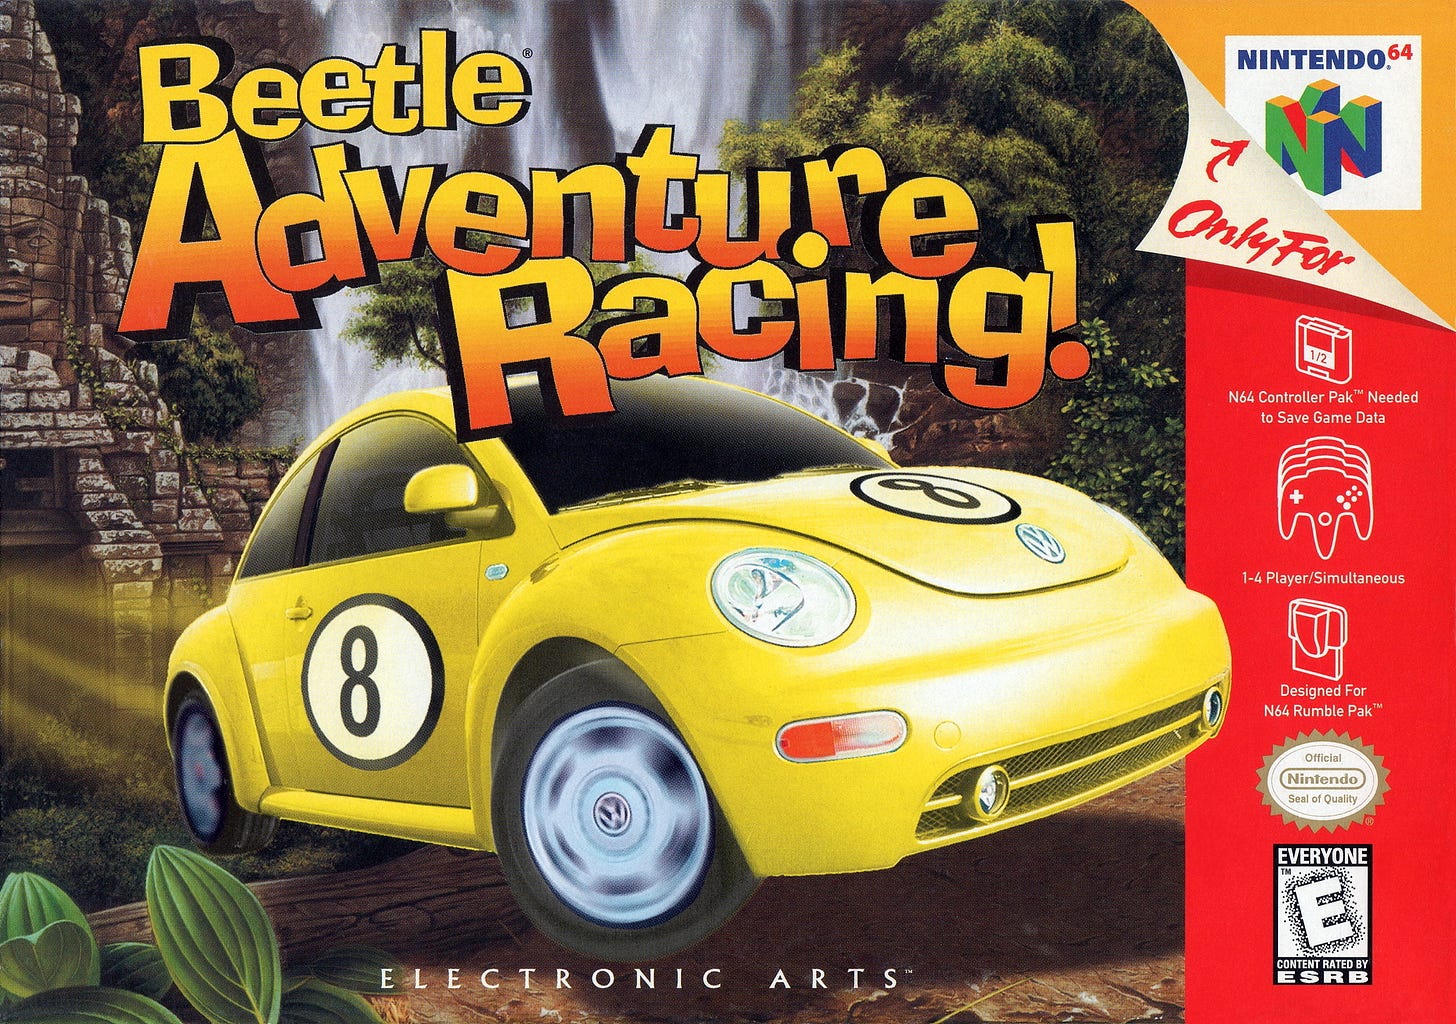 The North American box art for Beetle Adventure Racing!, which includes a yellow beetle with number 8 logos on the hood and sides, racing through the ruins amid a jungle.